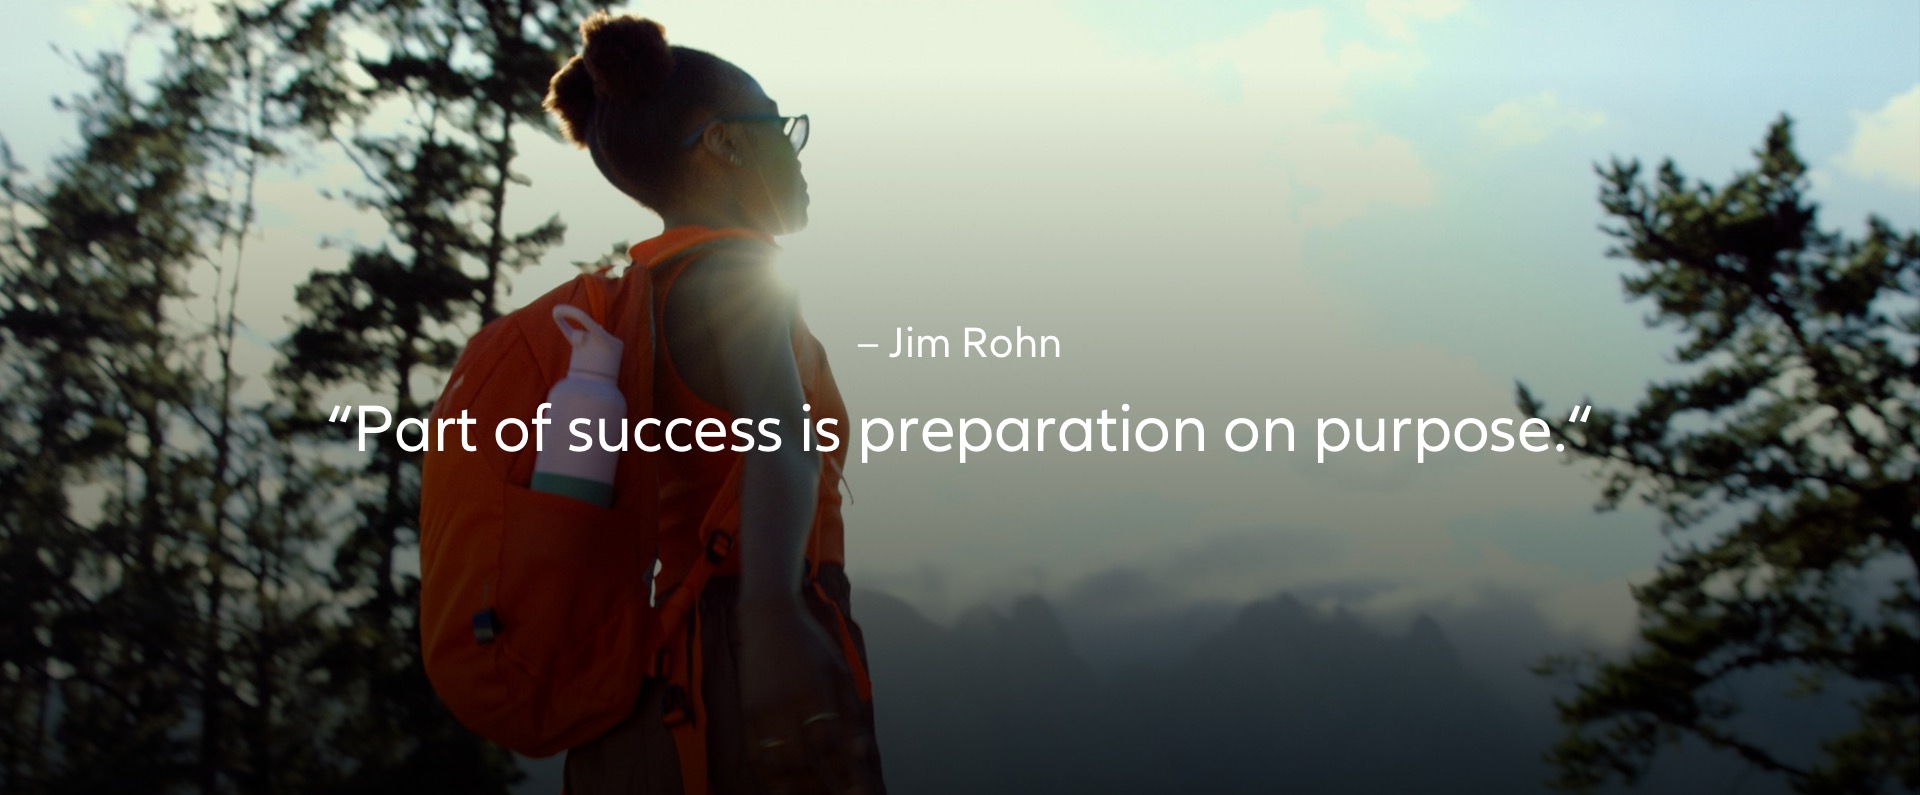 Jim Rohn – "Part of success is preparation on purpose." quote with a woman before the start of hiking up a mountain